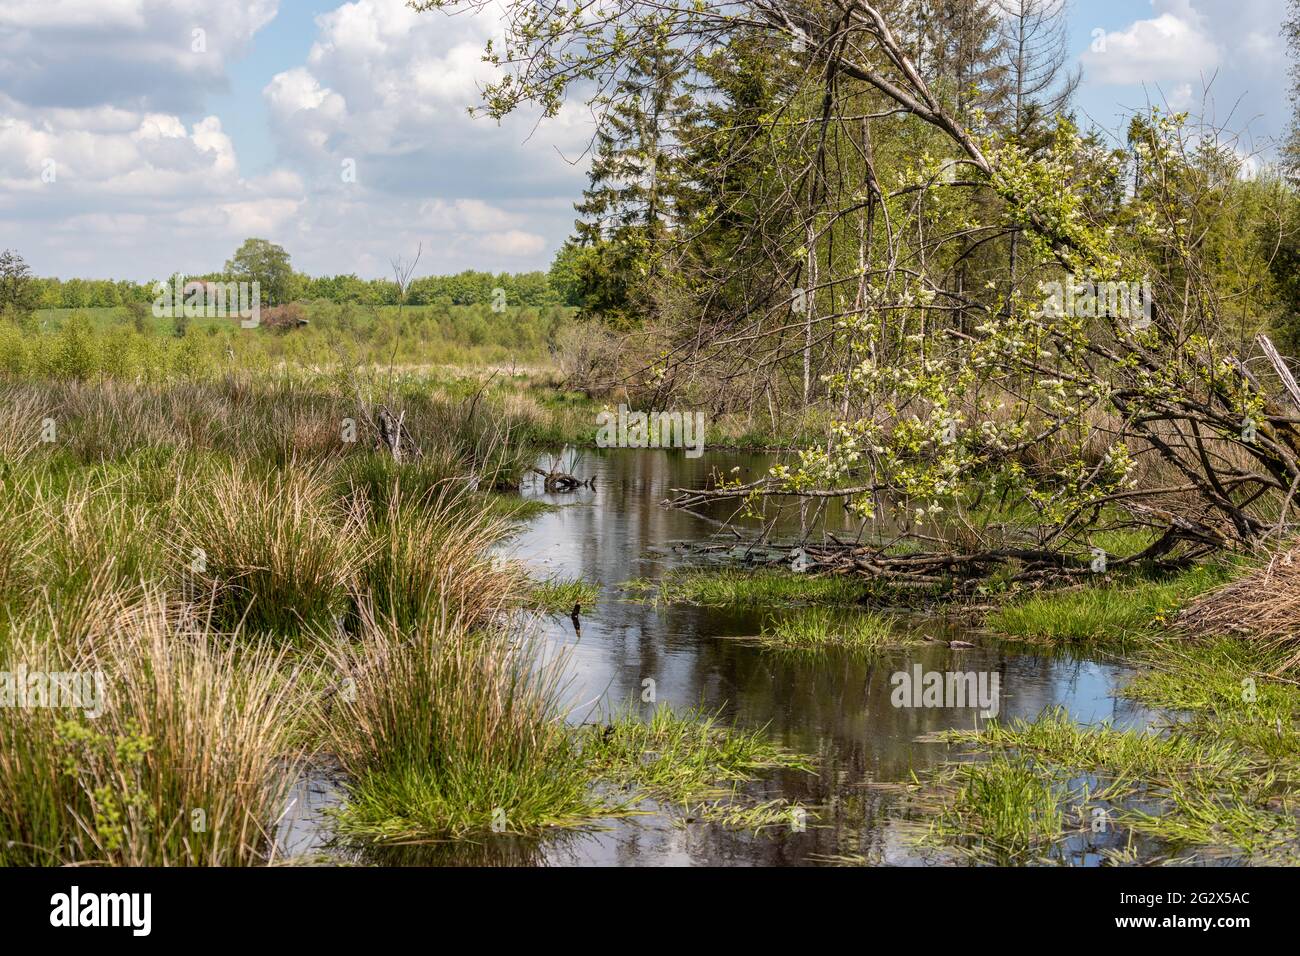 Swamp landscape with watercourse in the Eifel region near the city Simmerath Stock Photo